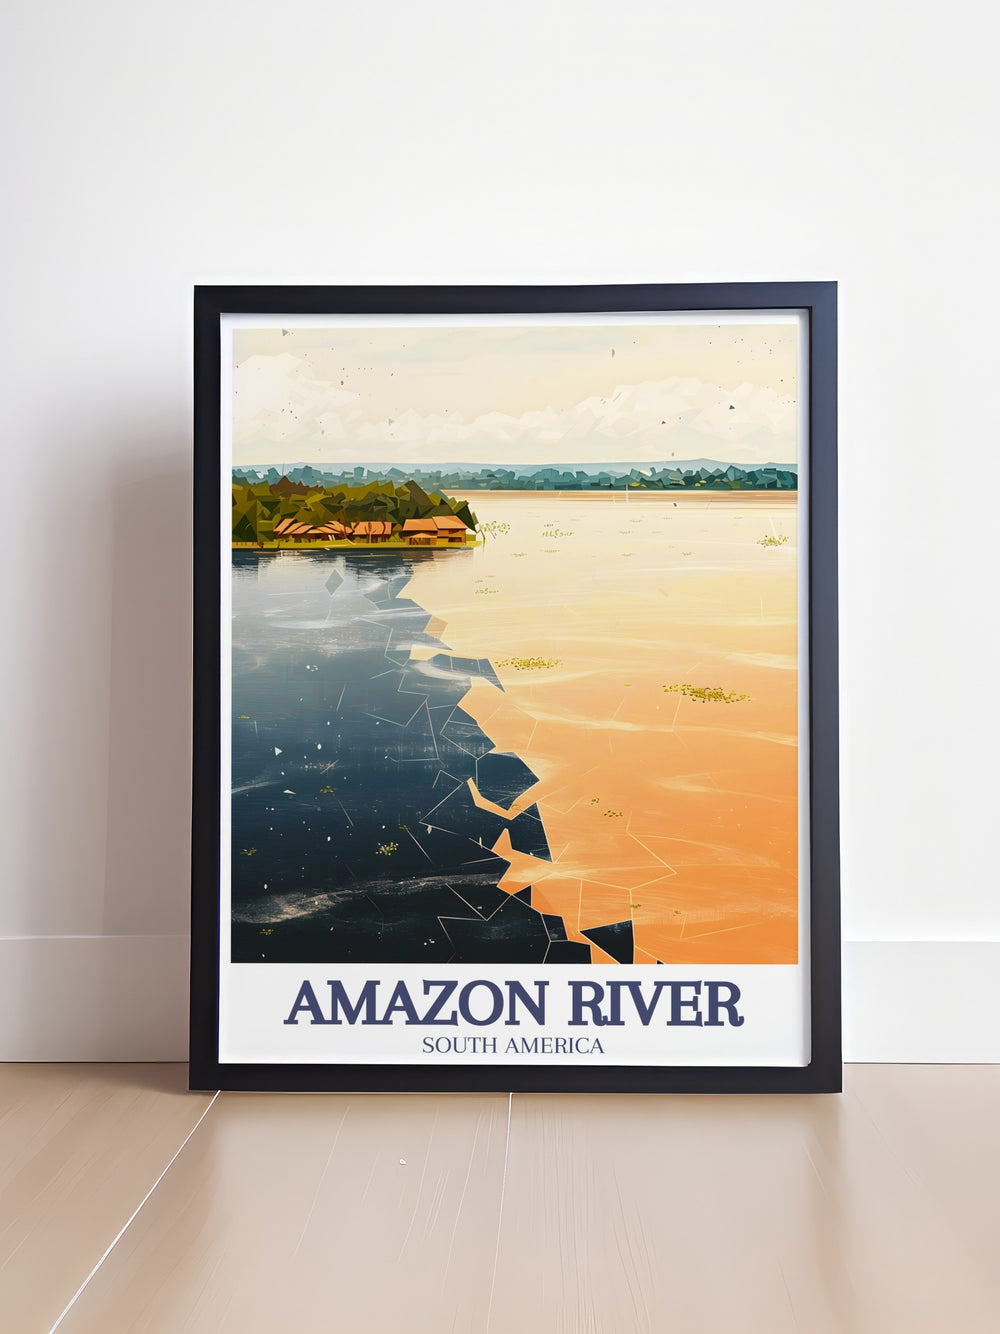 Experience the beauty of Encontro das Aguas, Rio Negro and Solimoes rivers with this vintage poster. The detailed artwork showcases the unique merging of the two rivers, making it a perfect piece for collectors and nature enthusiasts who appreciate fine travel prints.